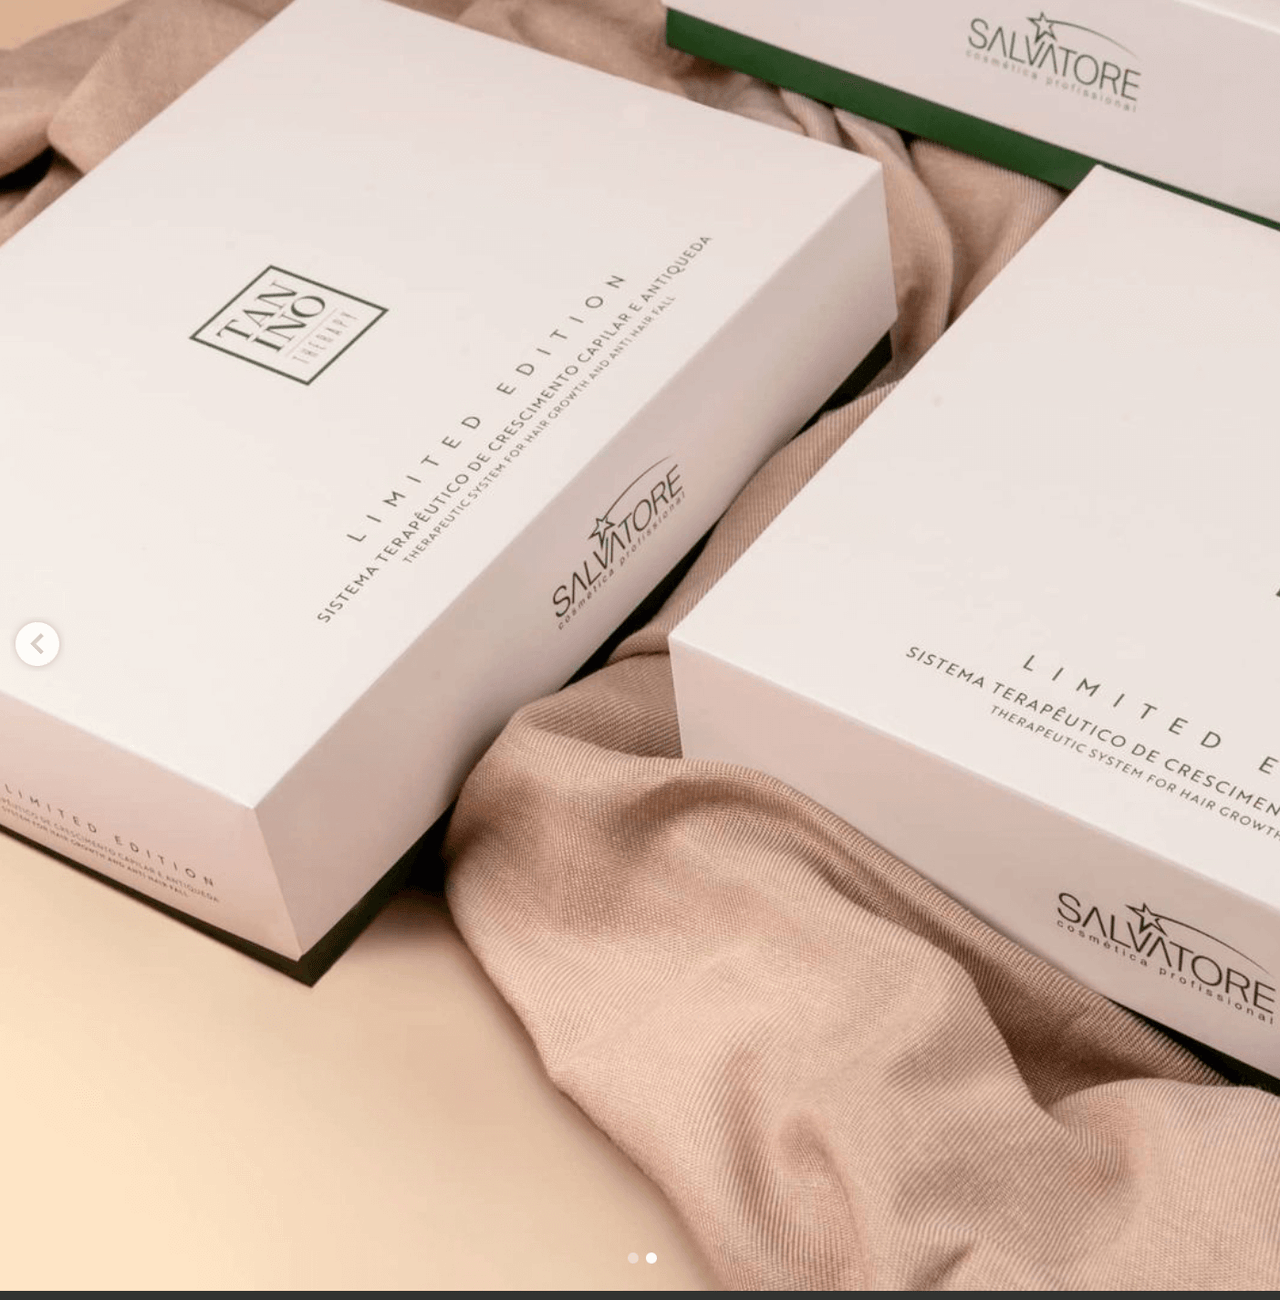 Salvatore - Therapeutic System Hair Growth KIT